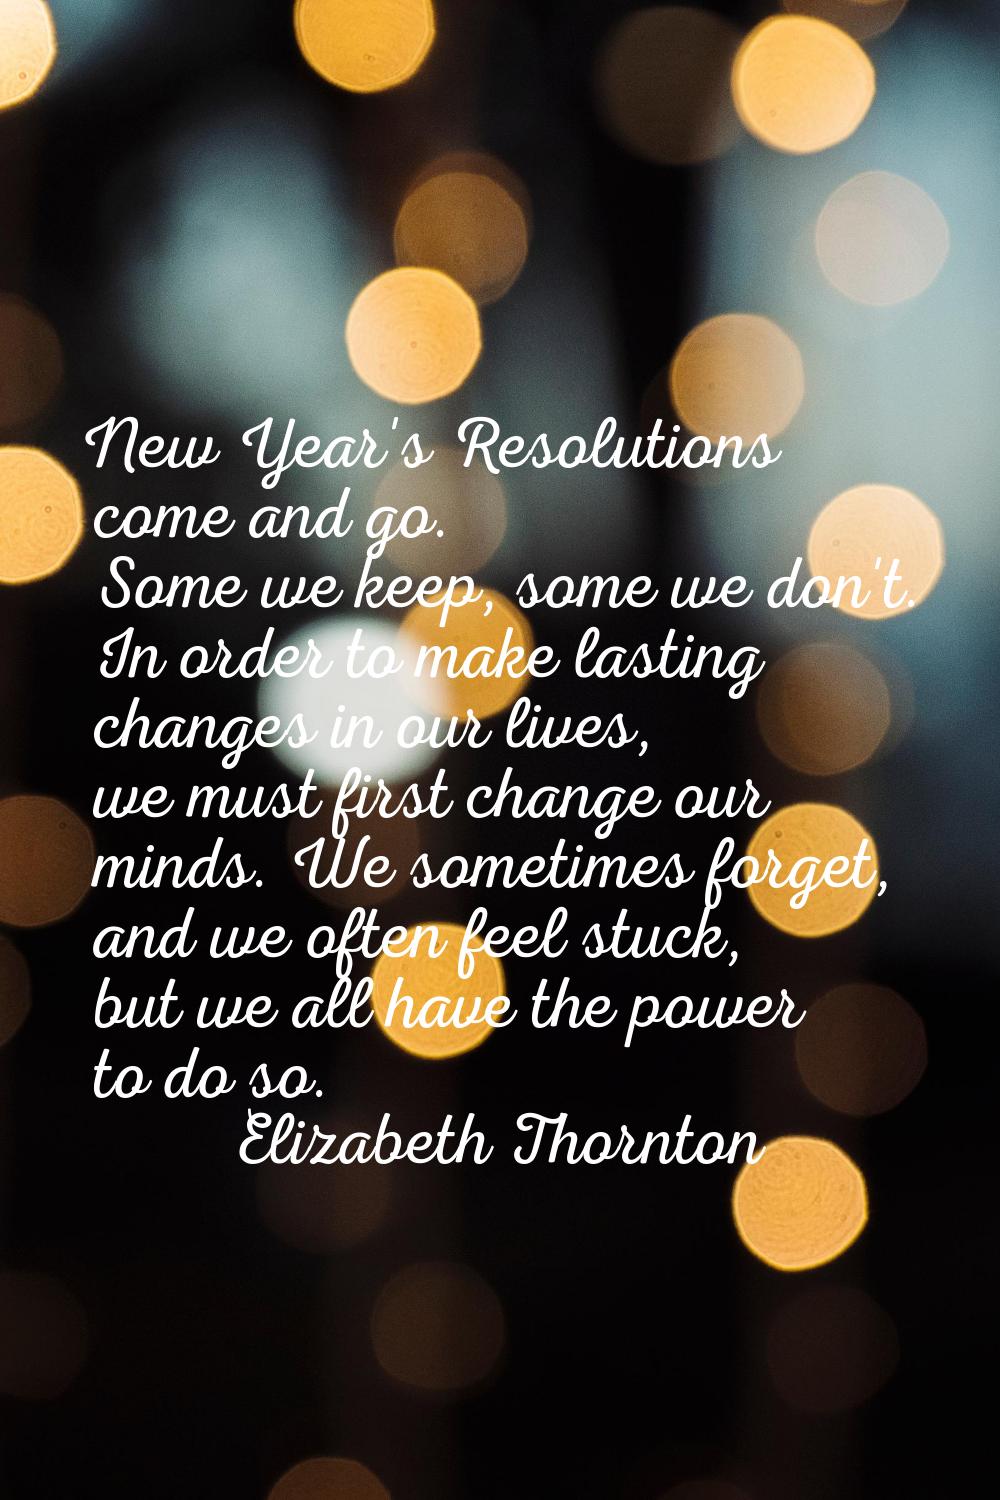 New Year's Resolutions come and go. Some we keep, some we don't. In order to make lasting changes i